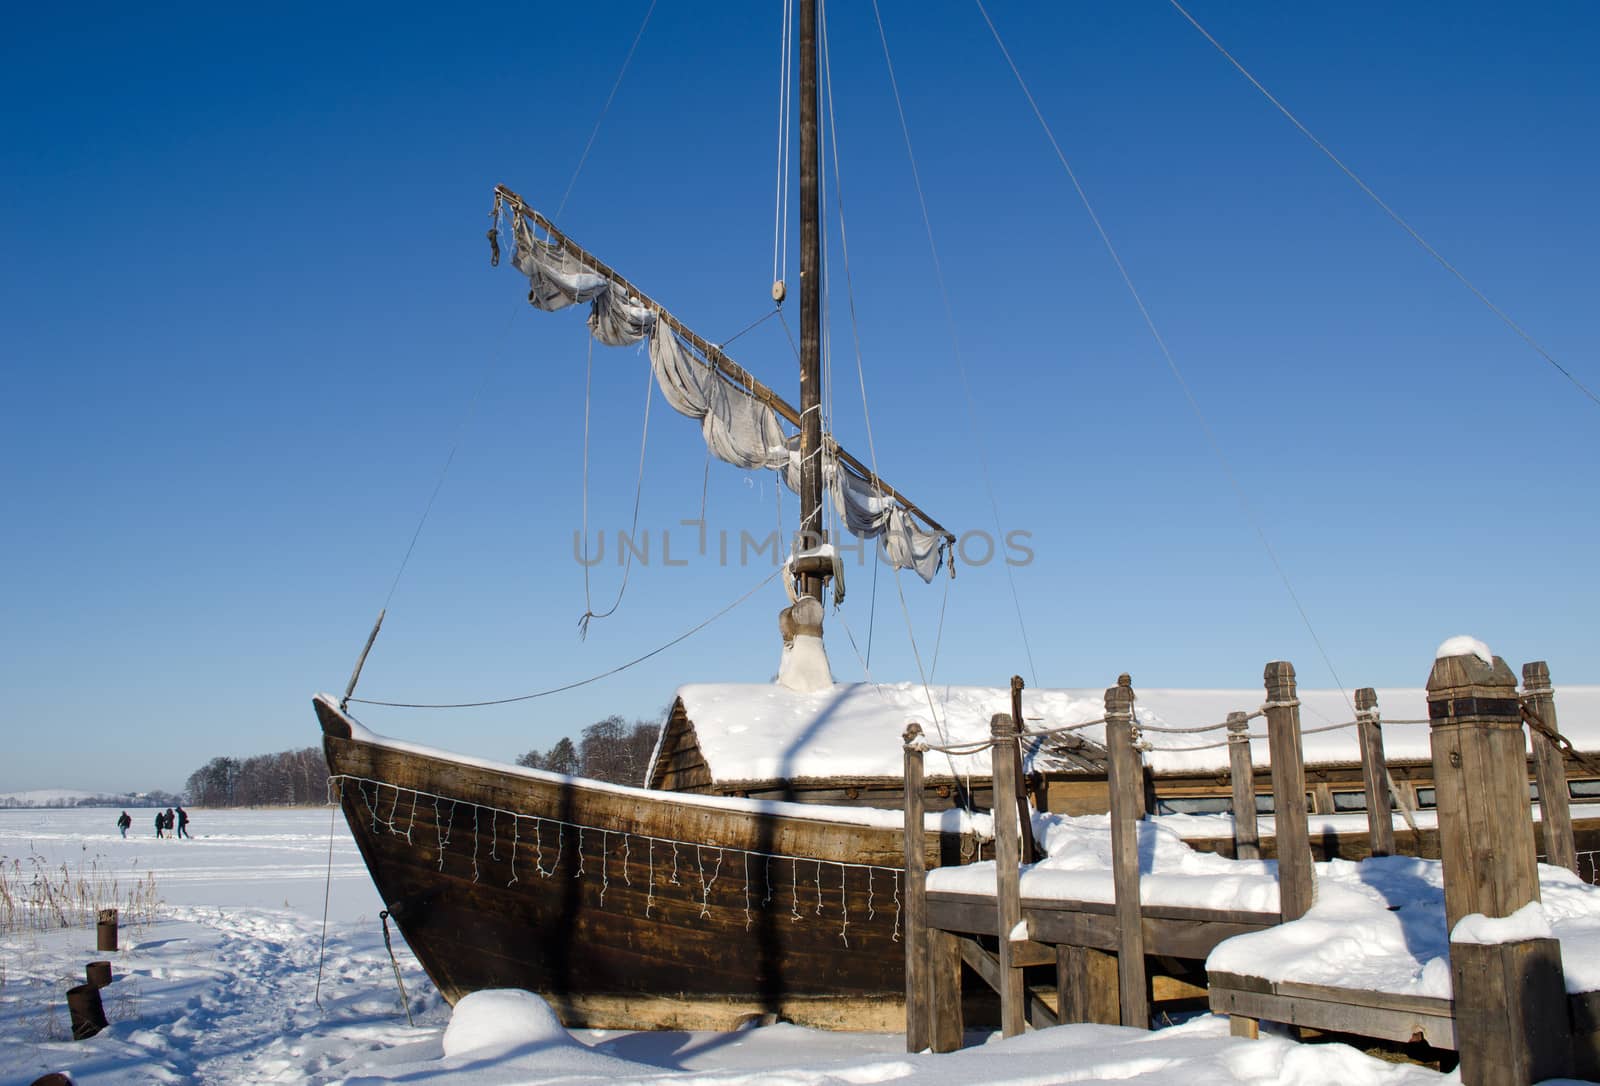 retro wooden ship frozen in lake ice near pier and sail on background of blue sky. people recreate in nature.